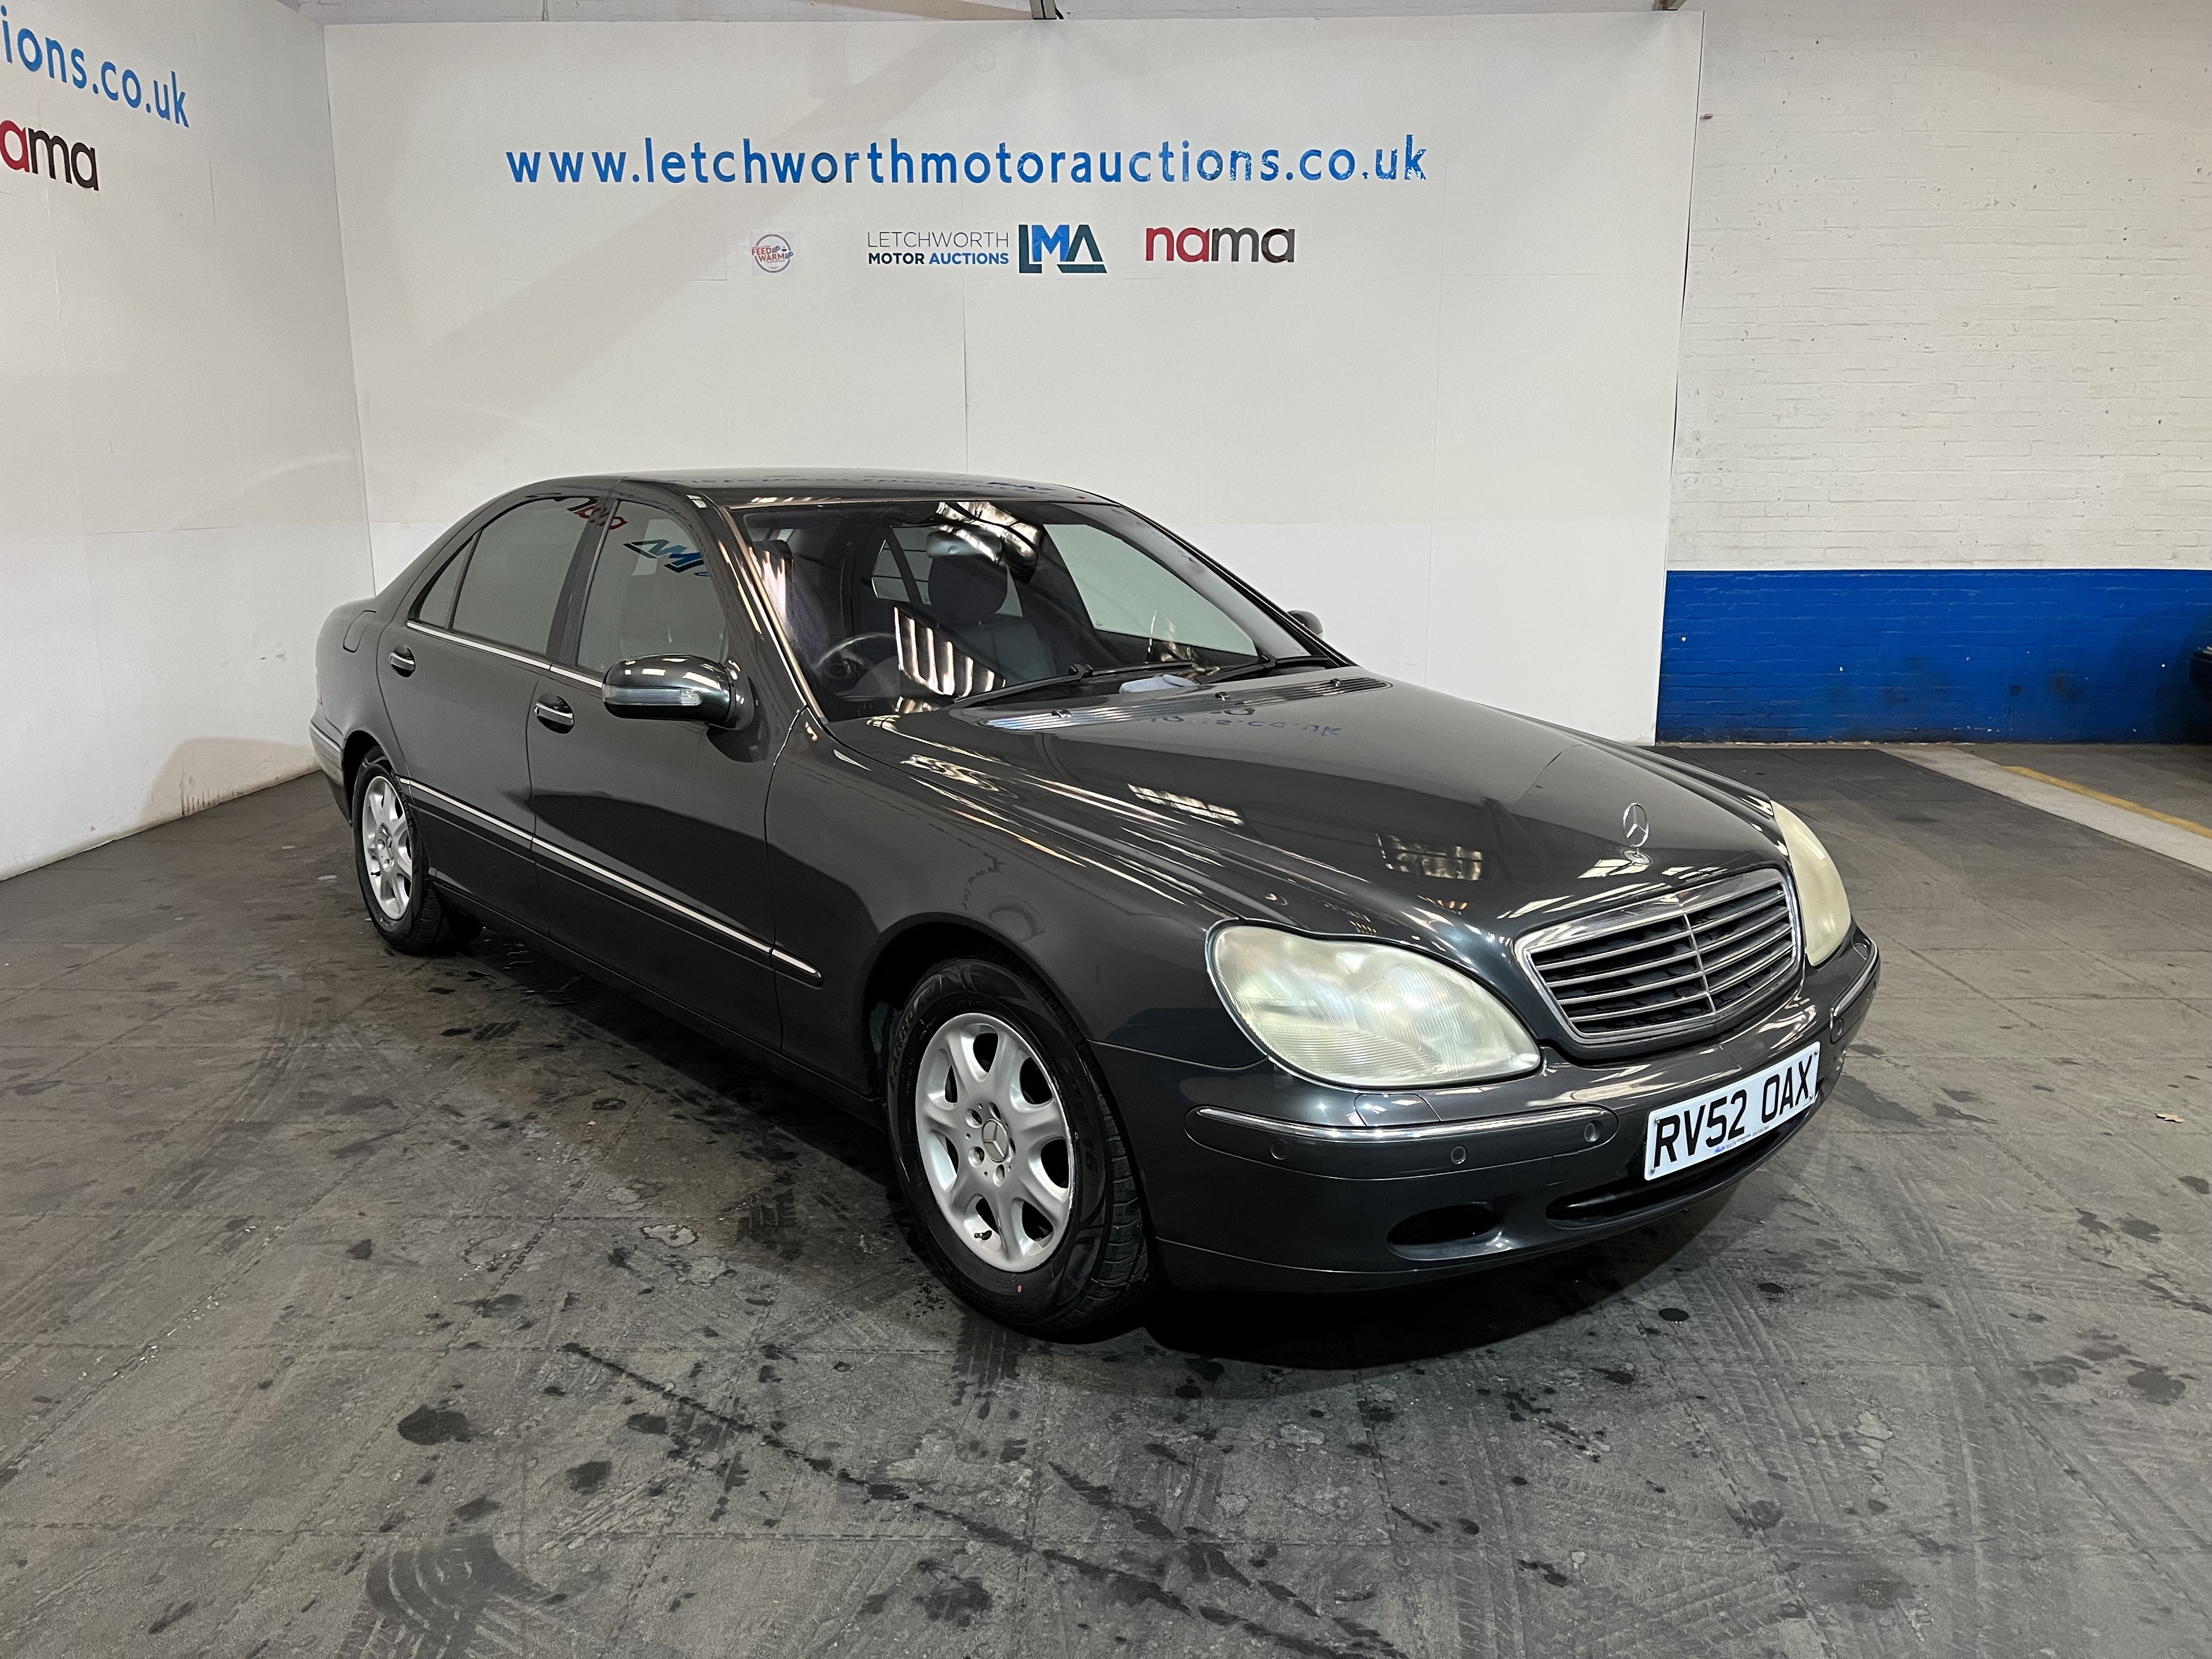 2002 Mercedes S320L Auto - 3199cc - ONE OWNER AND 11,455 MILES FROM NEW